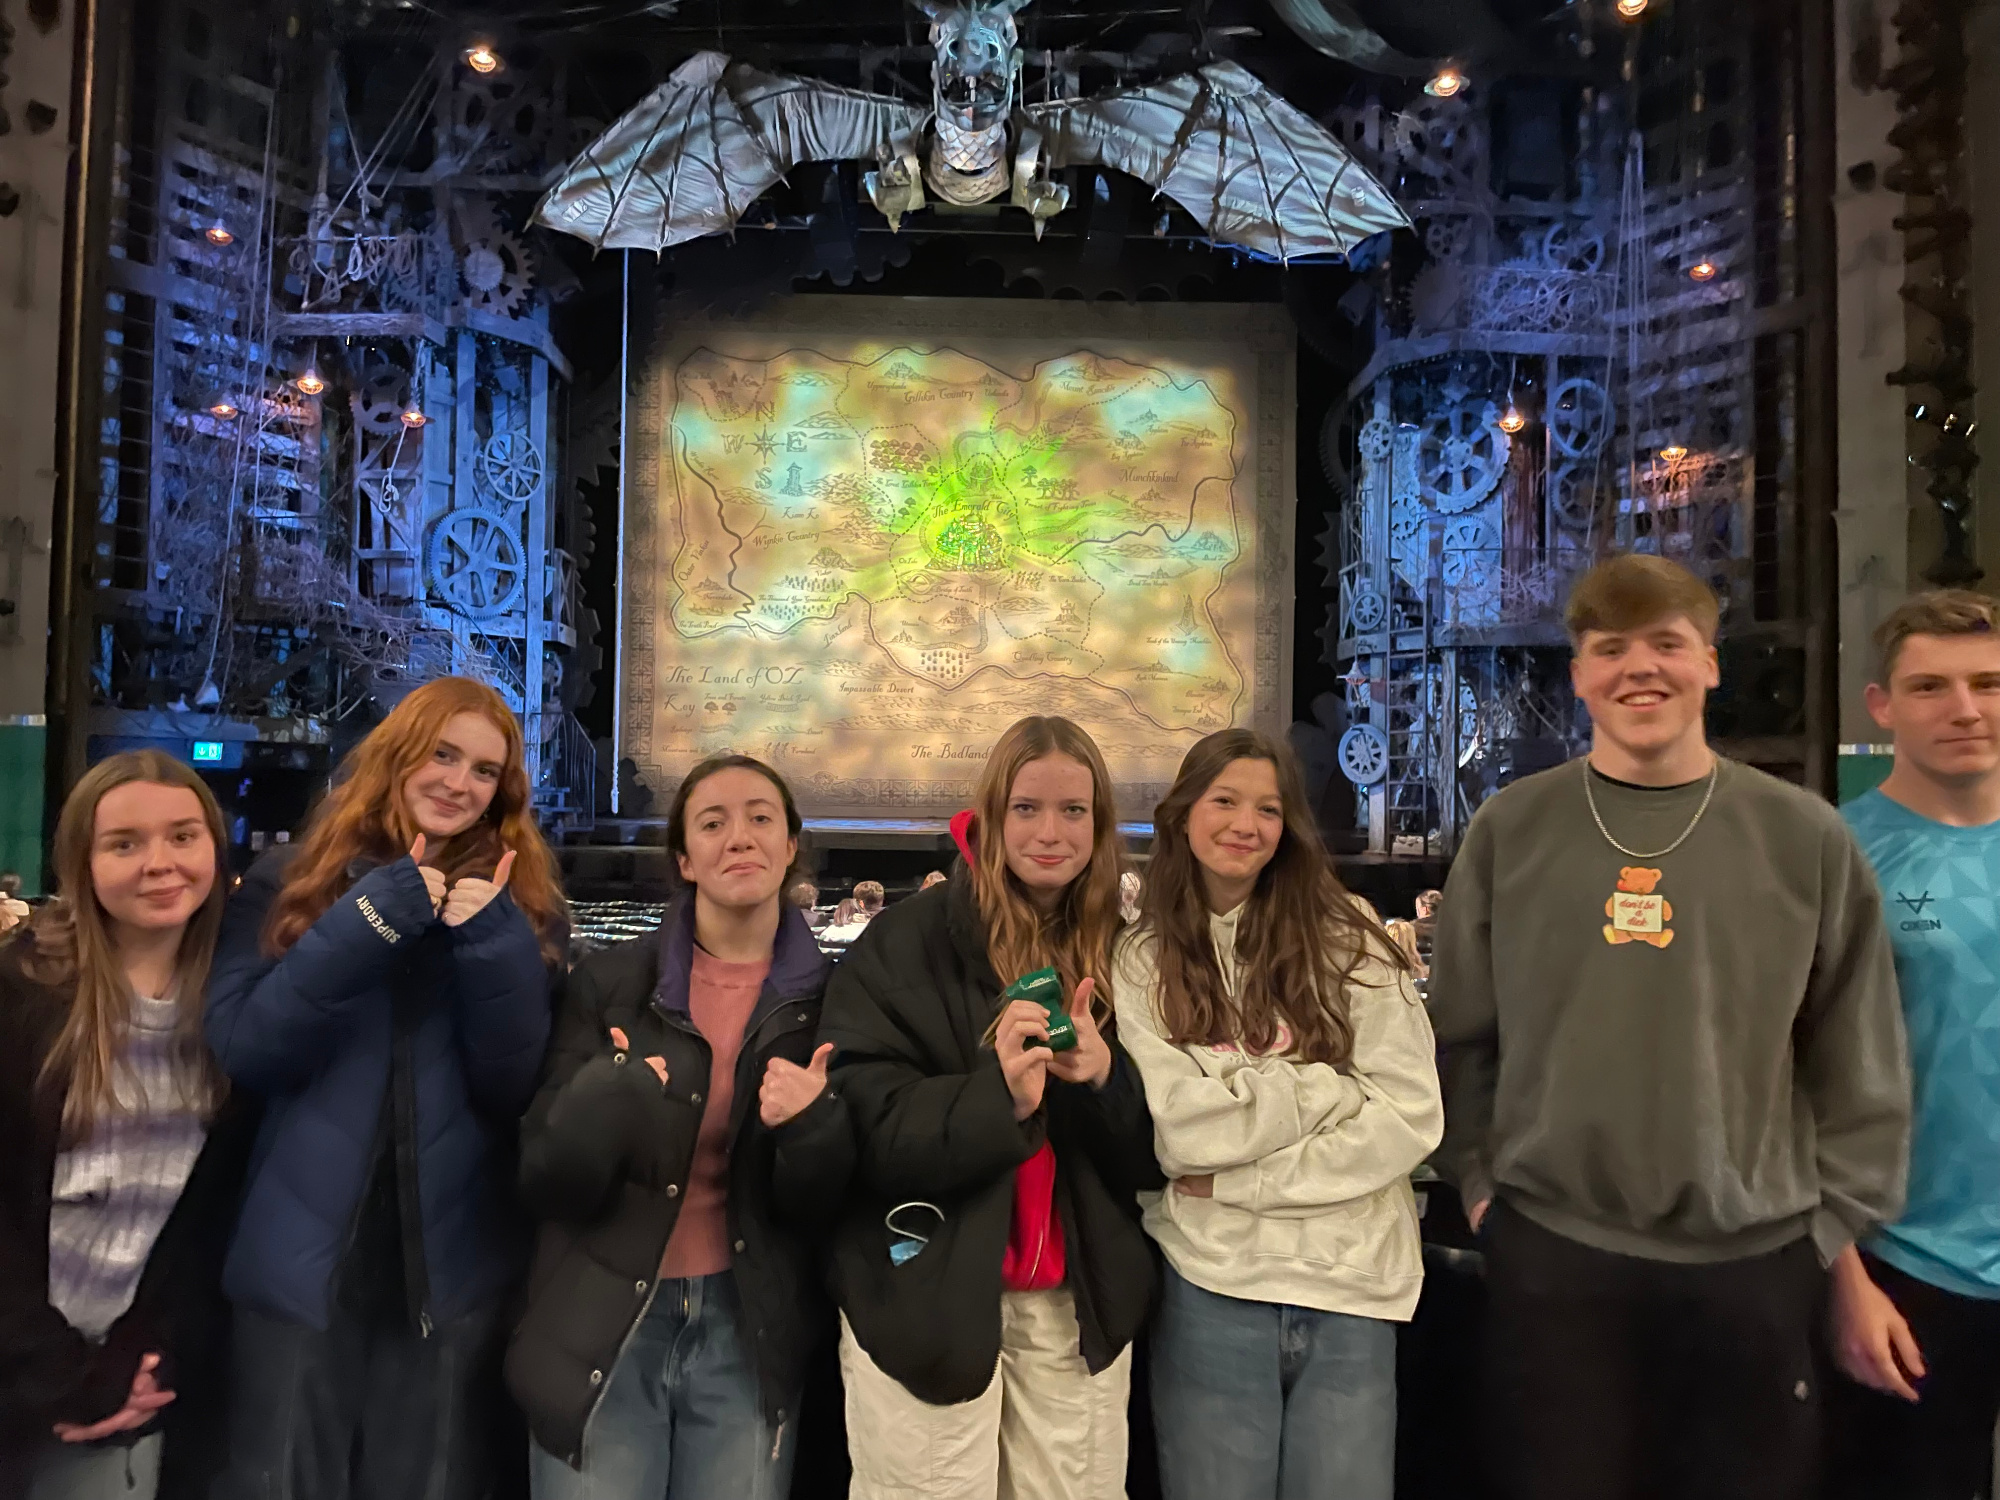 wicked theatre trip